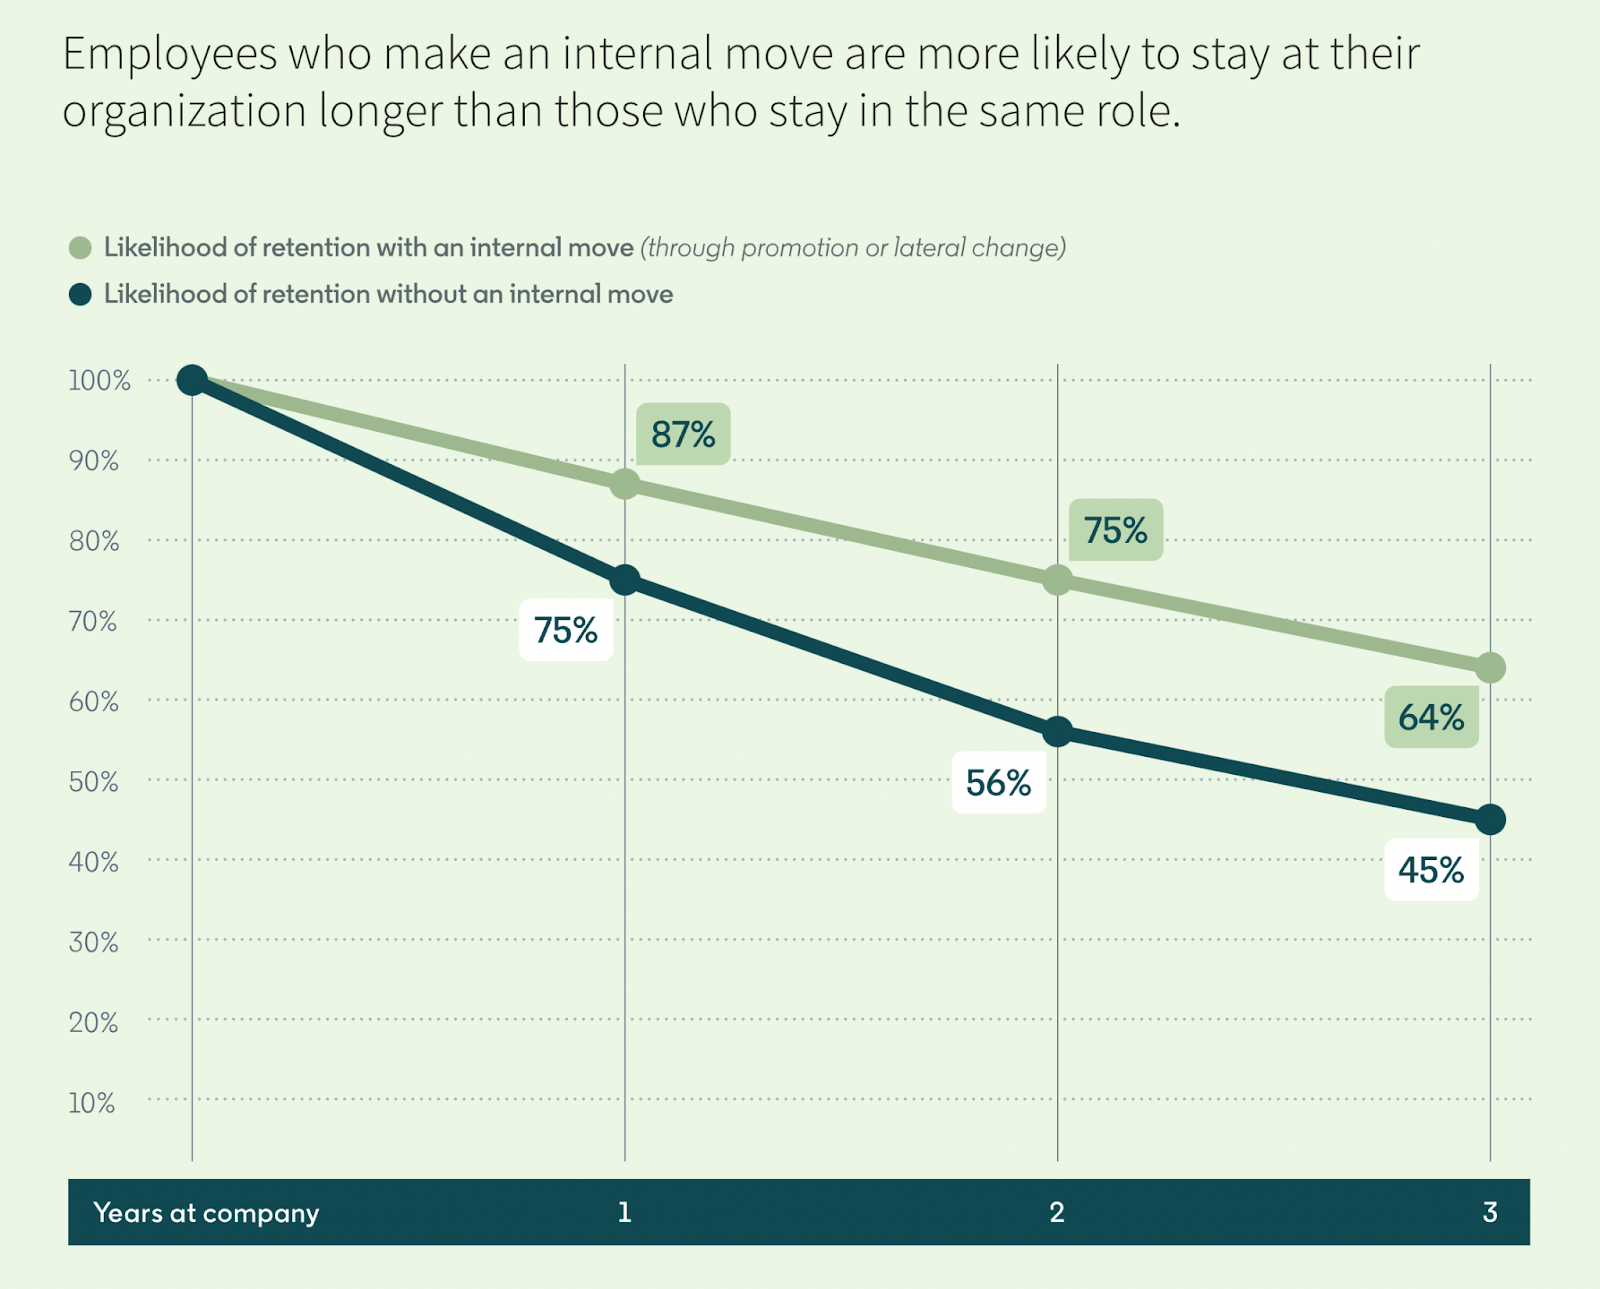 A chart showing a 19-point difference between the likelihood of retention for employees who make an internal move versus those who do not. 